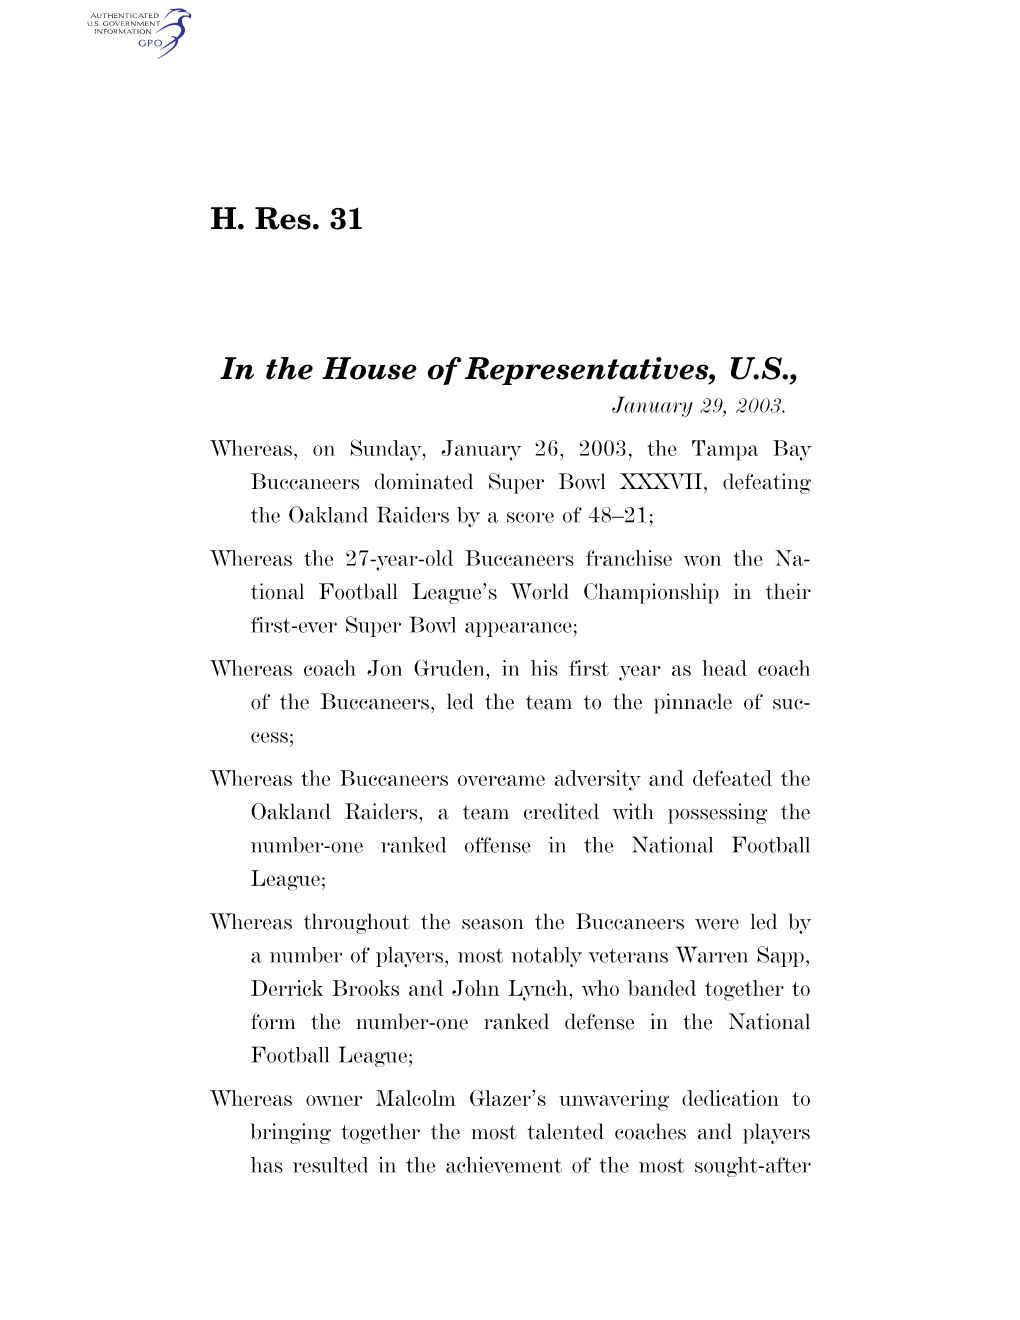 H. Res. 31 in the House of Representatives, U.S